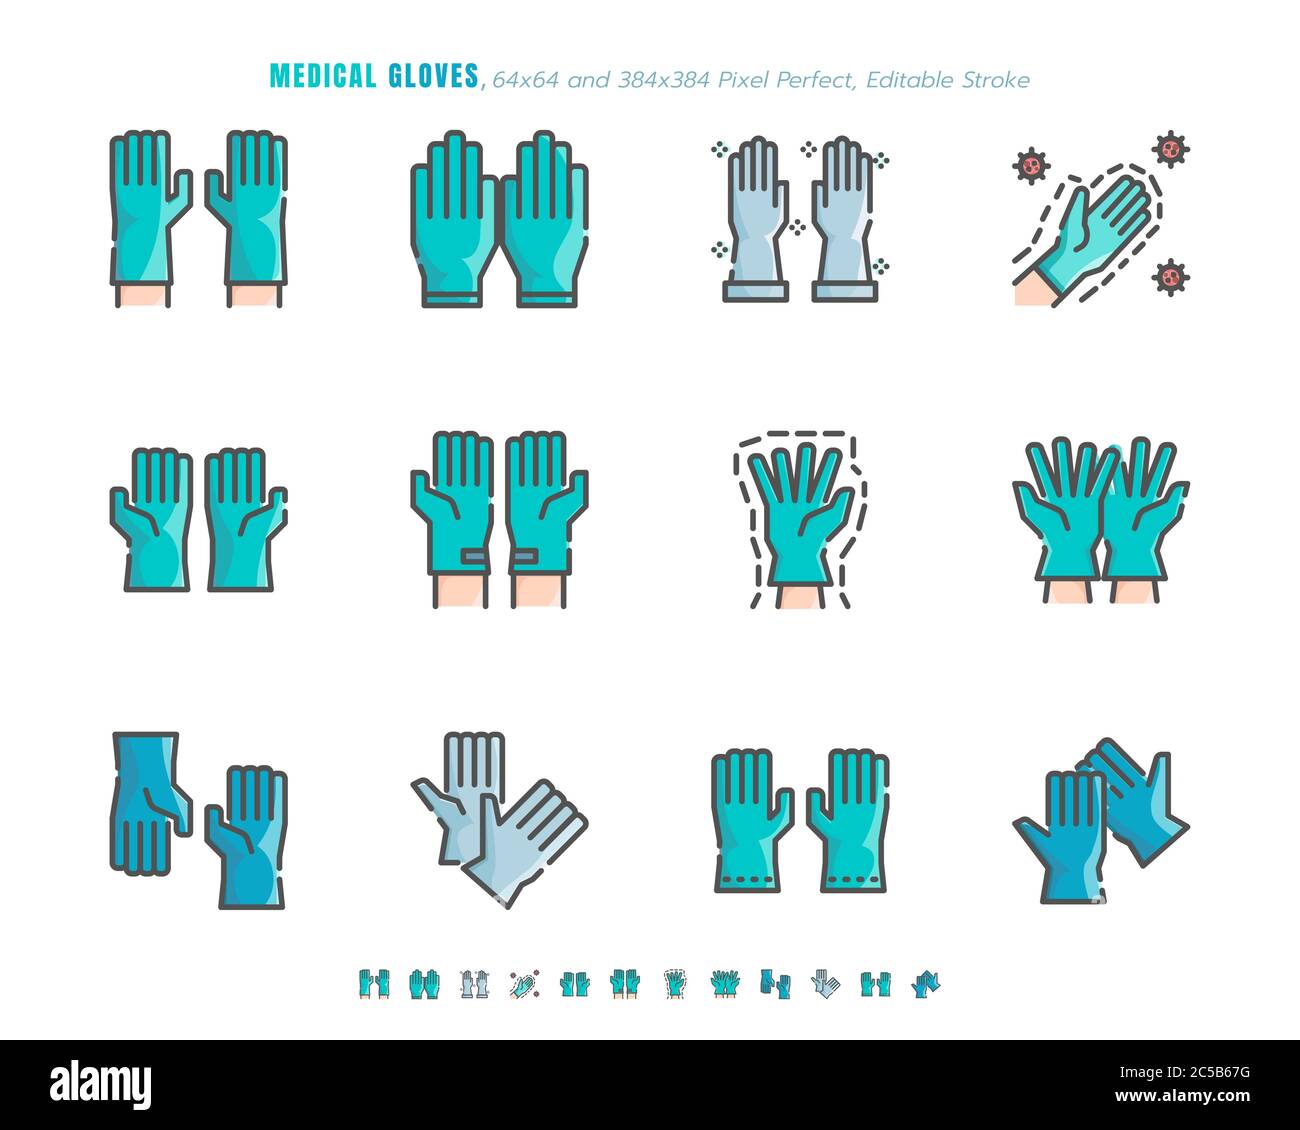 Simple set of Medical Gloves. Covid-19 or Coronavirus Disease 2019 Prevention Related. Filled Outline Flat color Icon Set. 64x64 Pixel Perfect. Editab Stock Vector